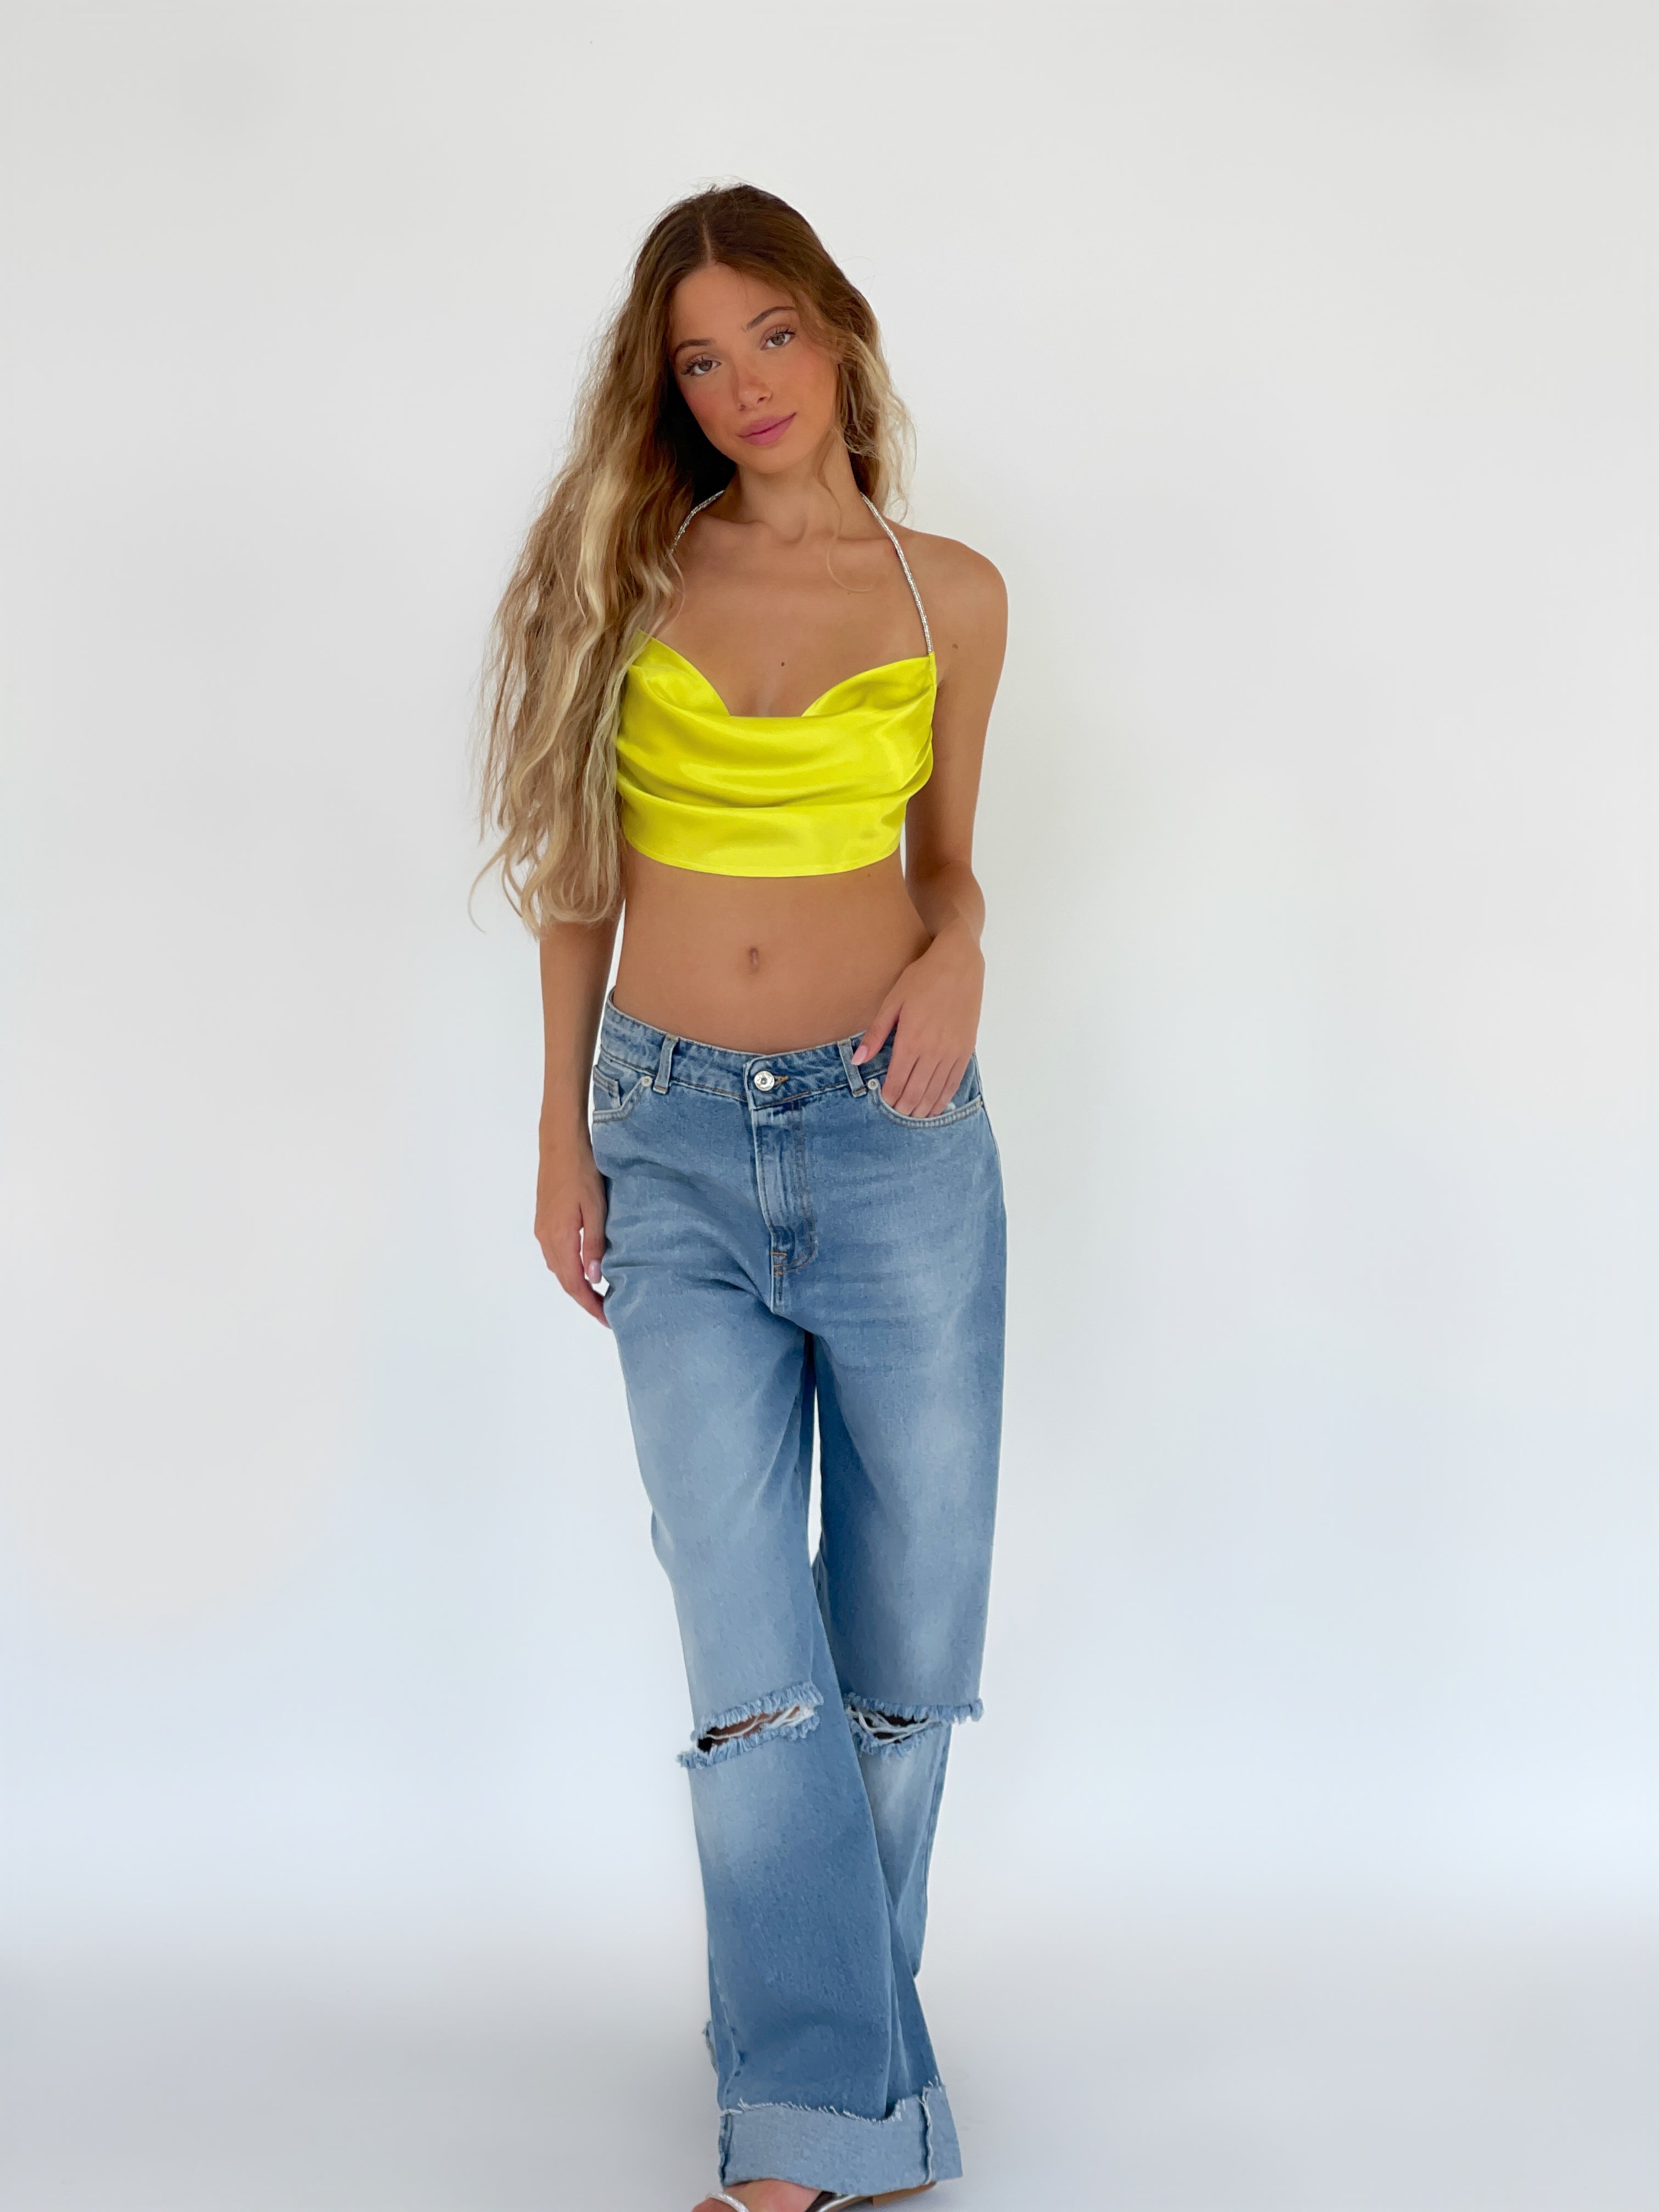 CROPPED TOP WITH DIAMANTE DETAILS IN LIME GREEN